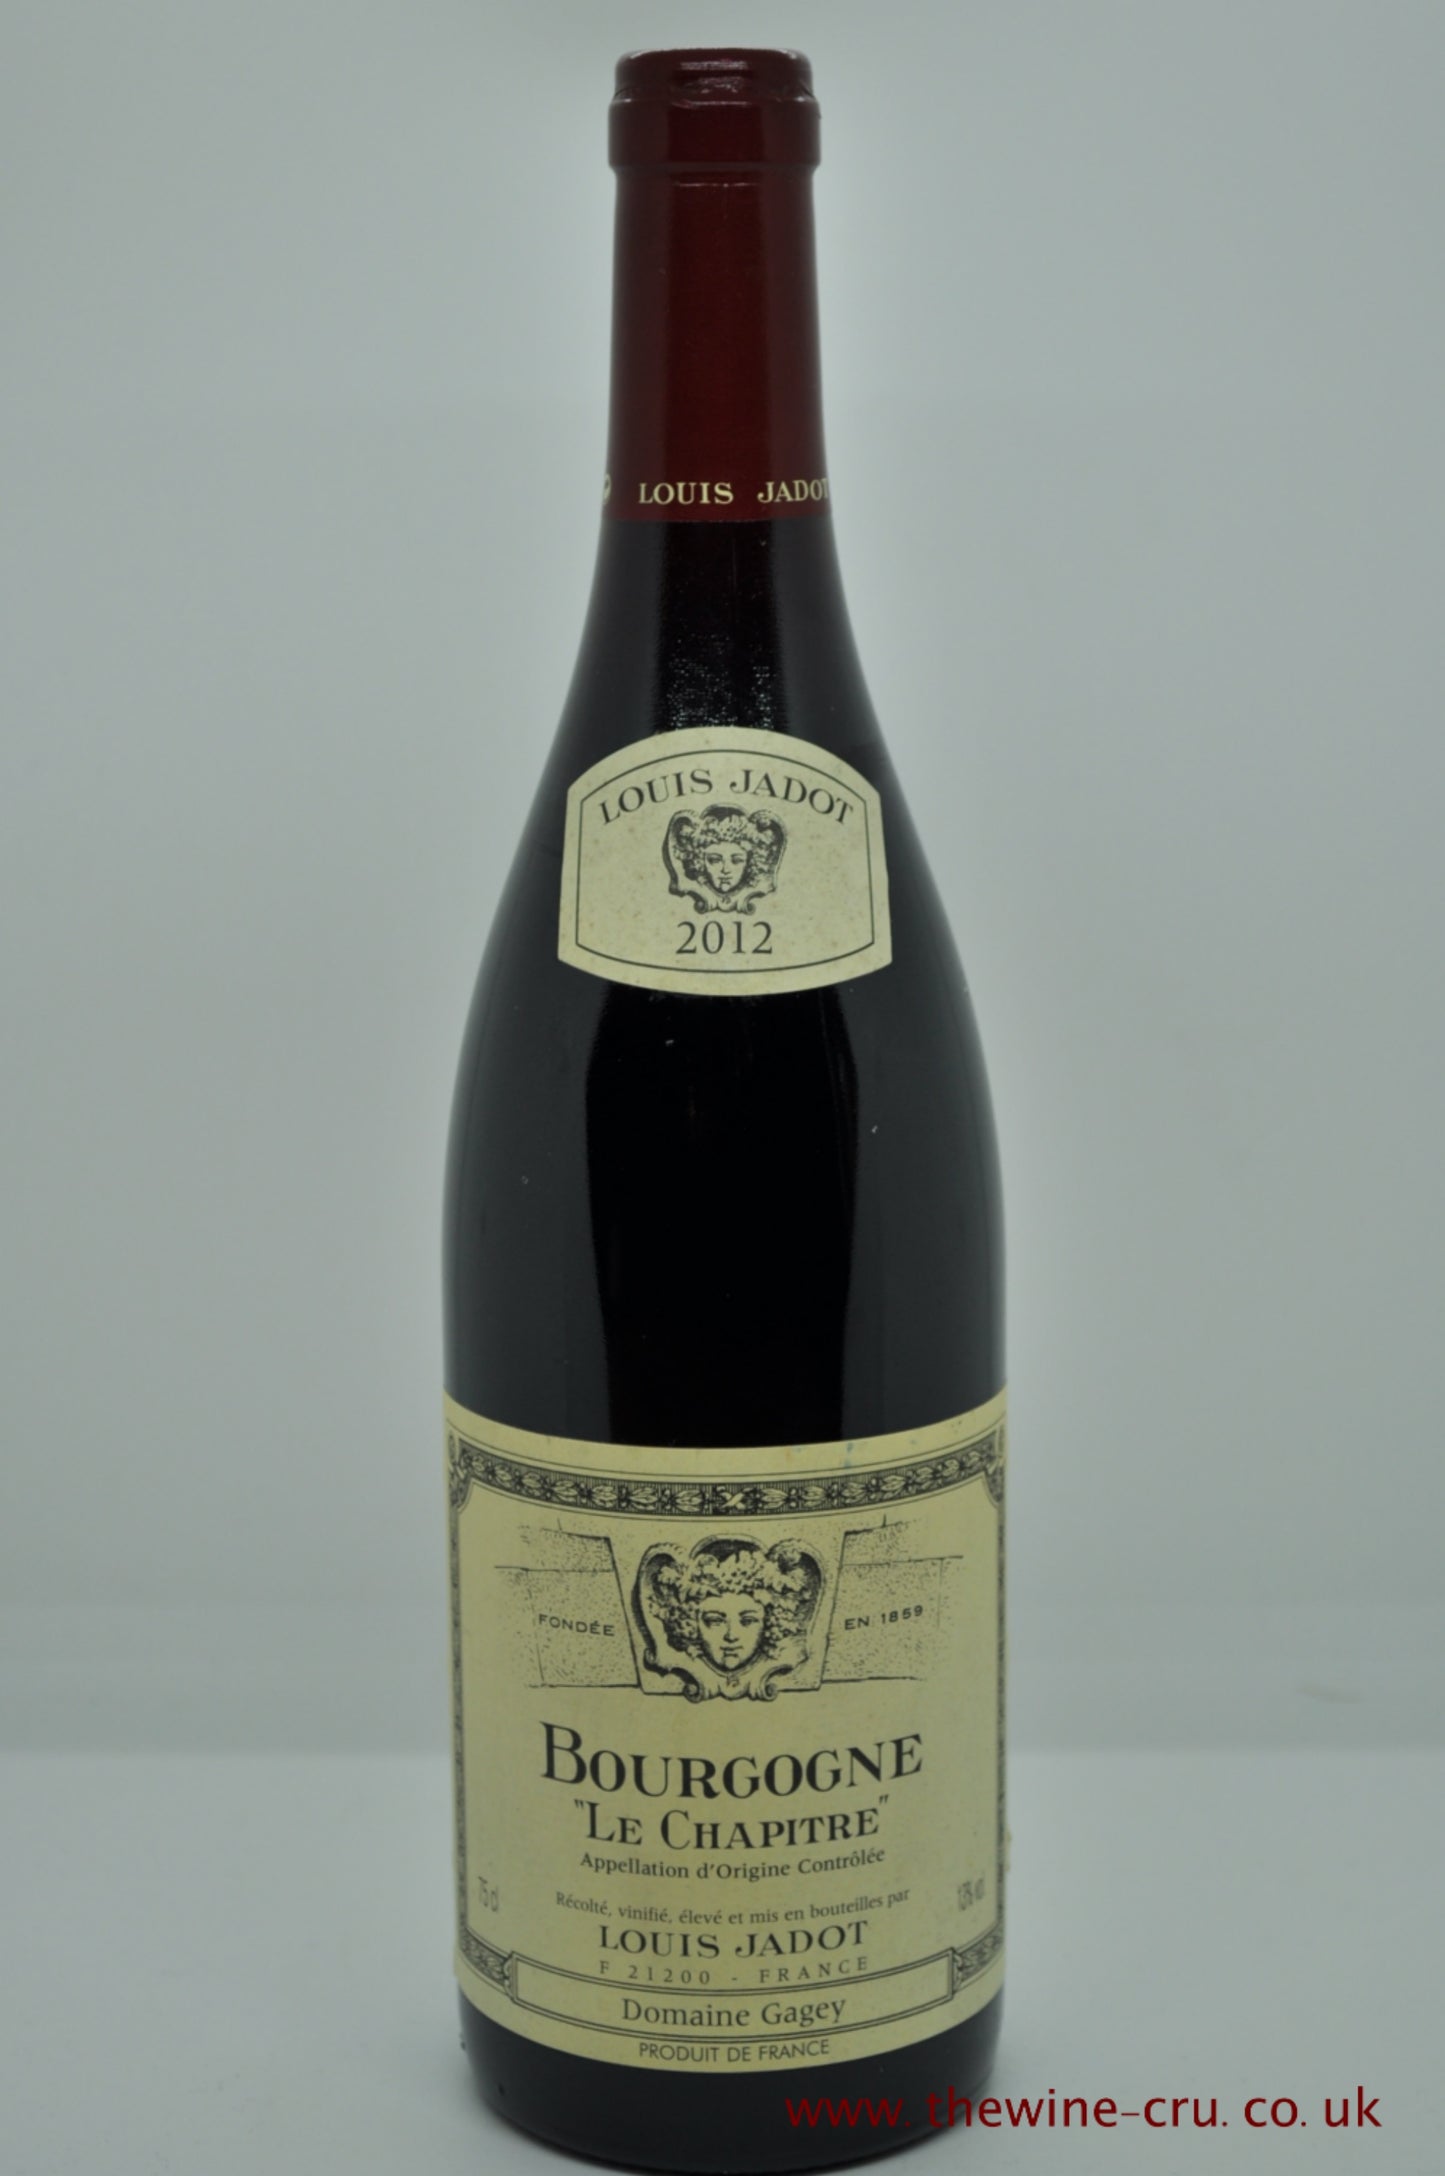 A bottle of Louis Jadot Domaine Gagey Bourgogne Le Chapitre 2012 from France, Burgundy. The bottle condition is excellent and its available for immediate delivery , including free local delivery. Gift wrapping available.